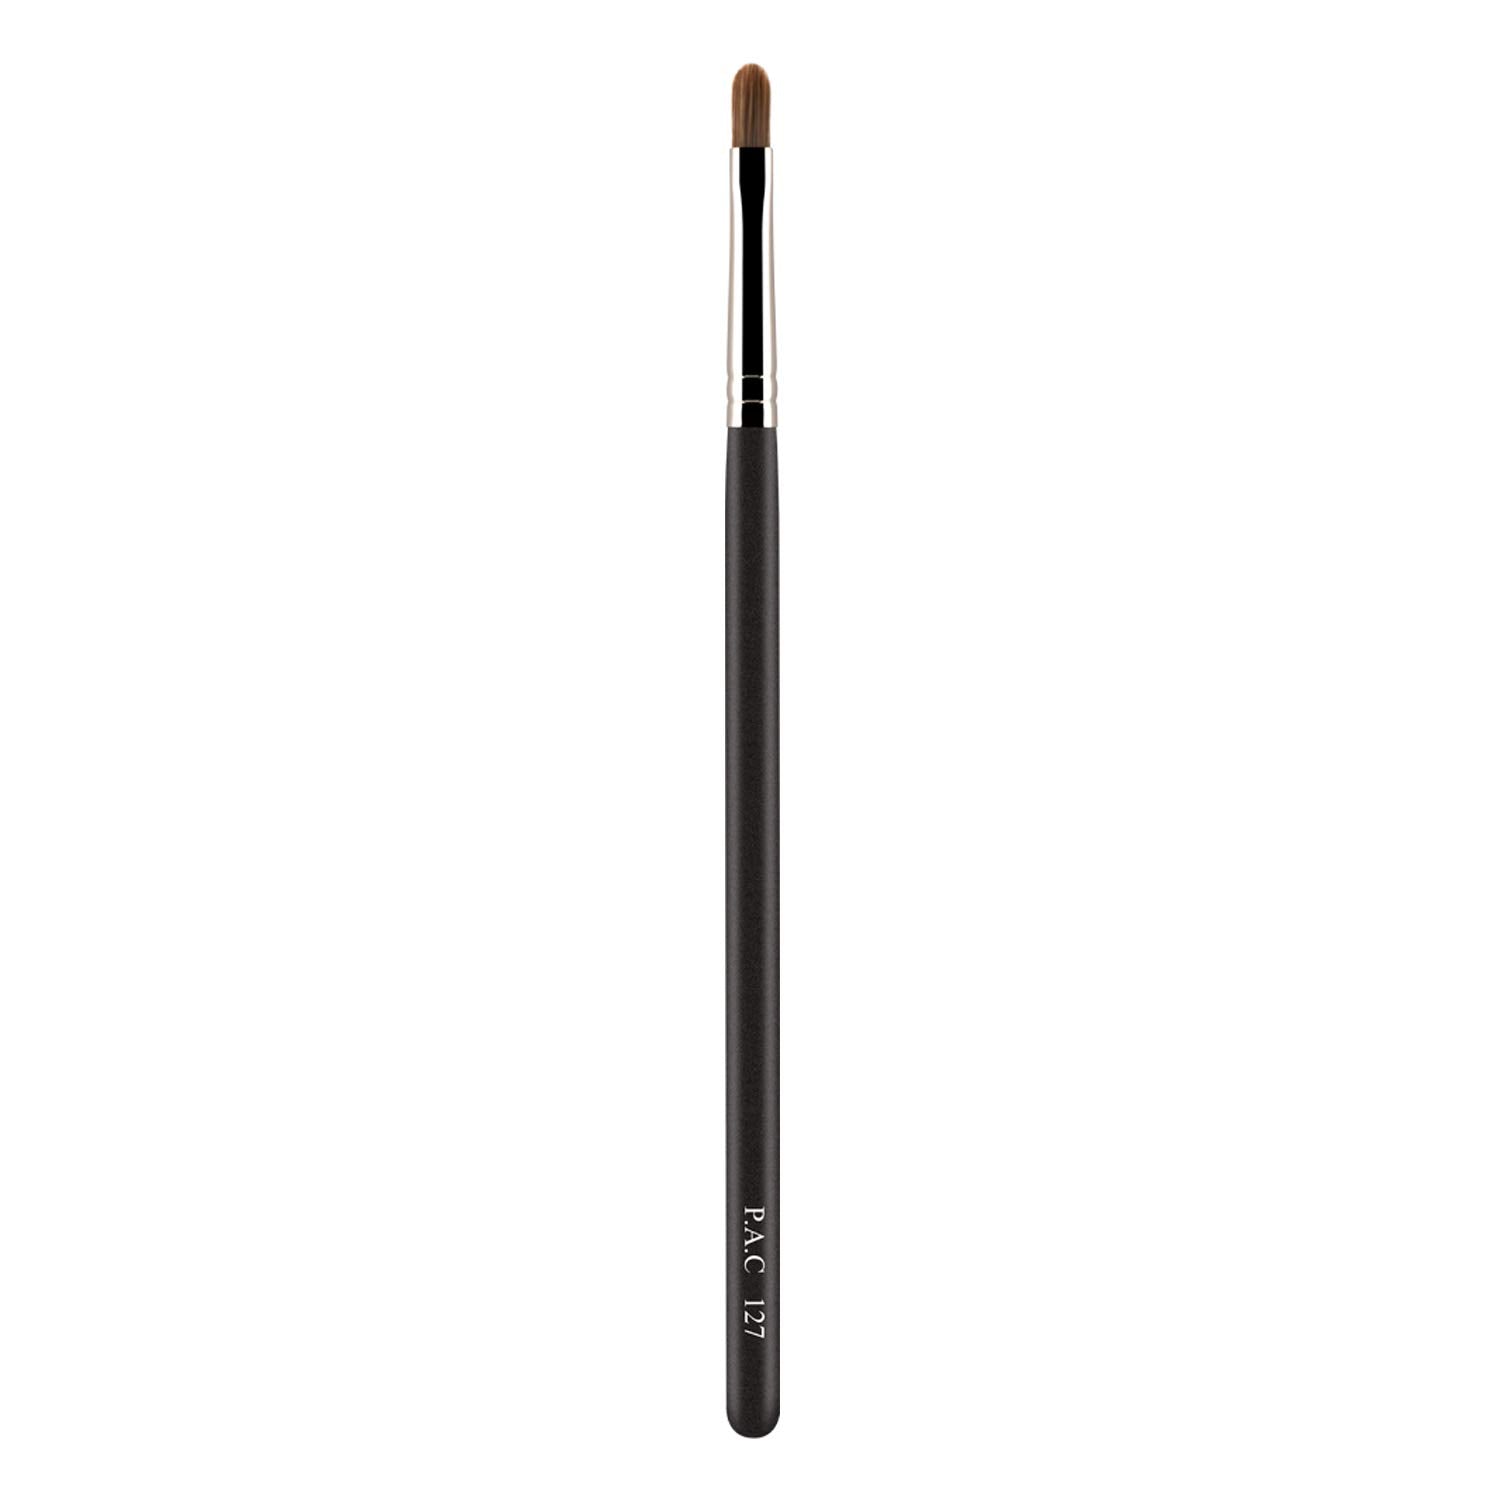 PAC Concealer Brush 127 PAC